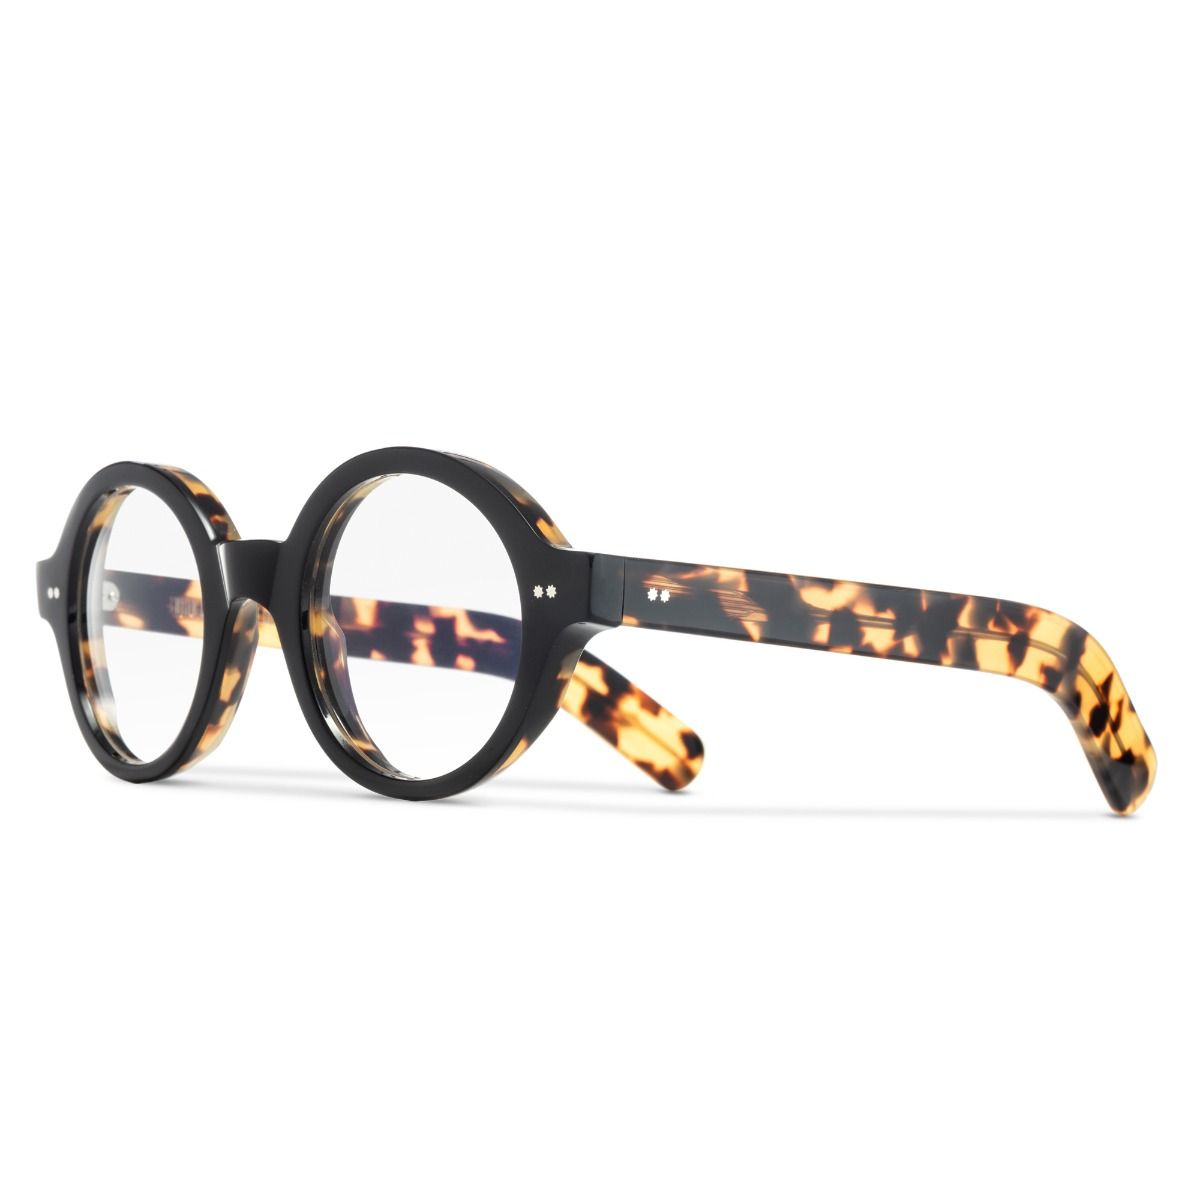 Cutler and Gross, 1396 Optical Round Glasses-Black on Camo